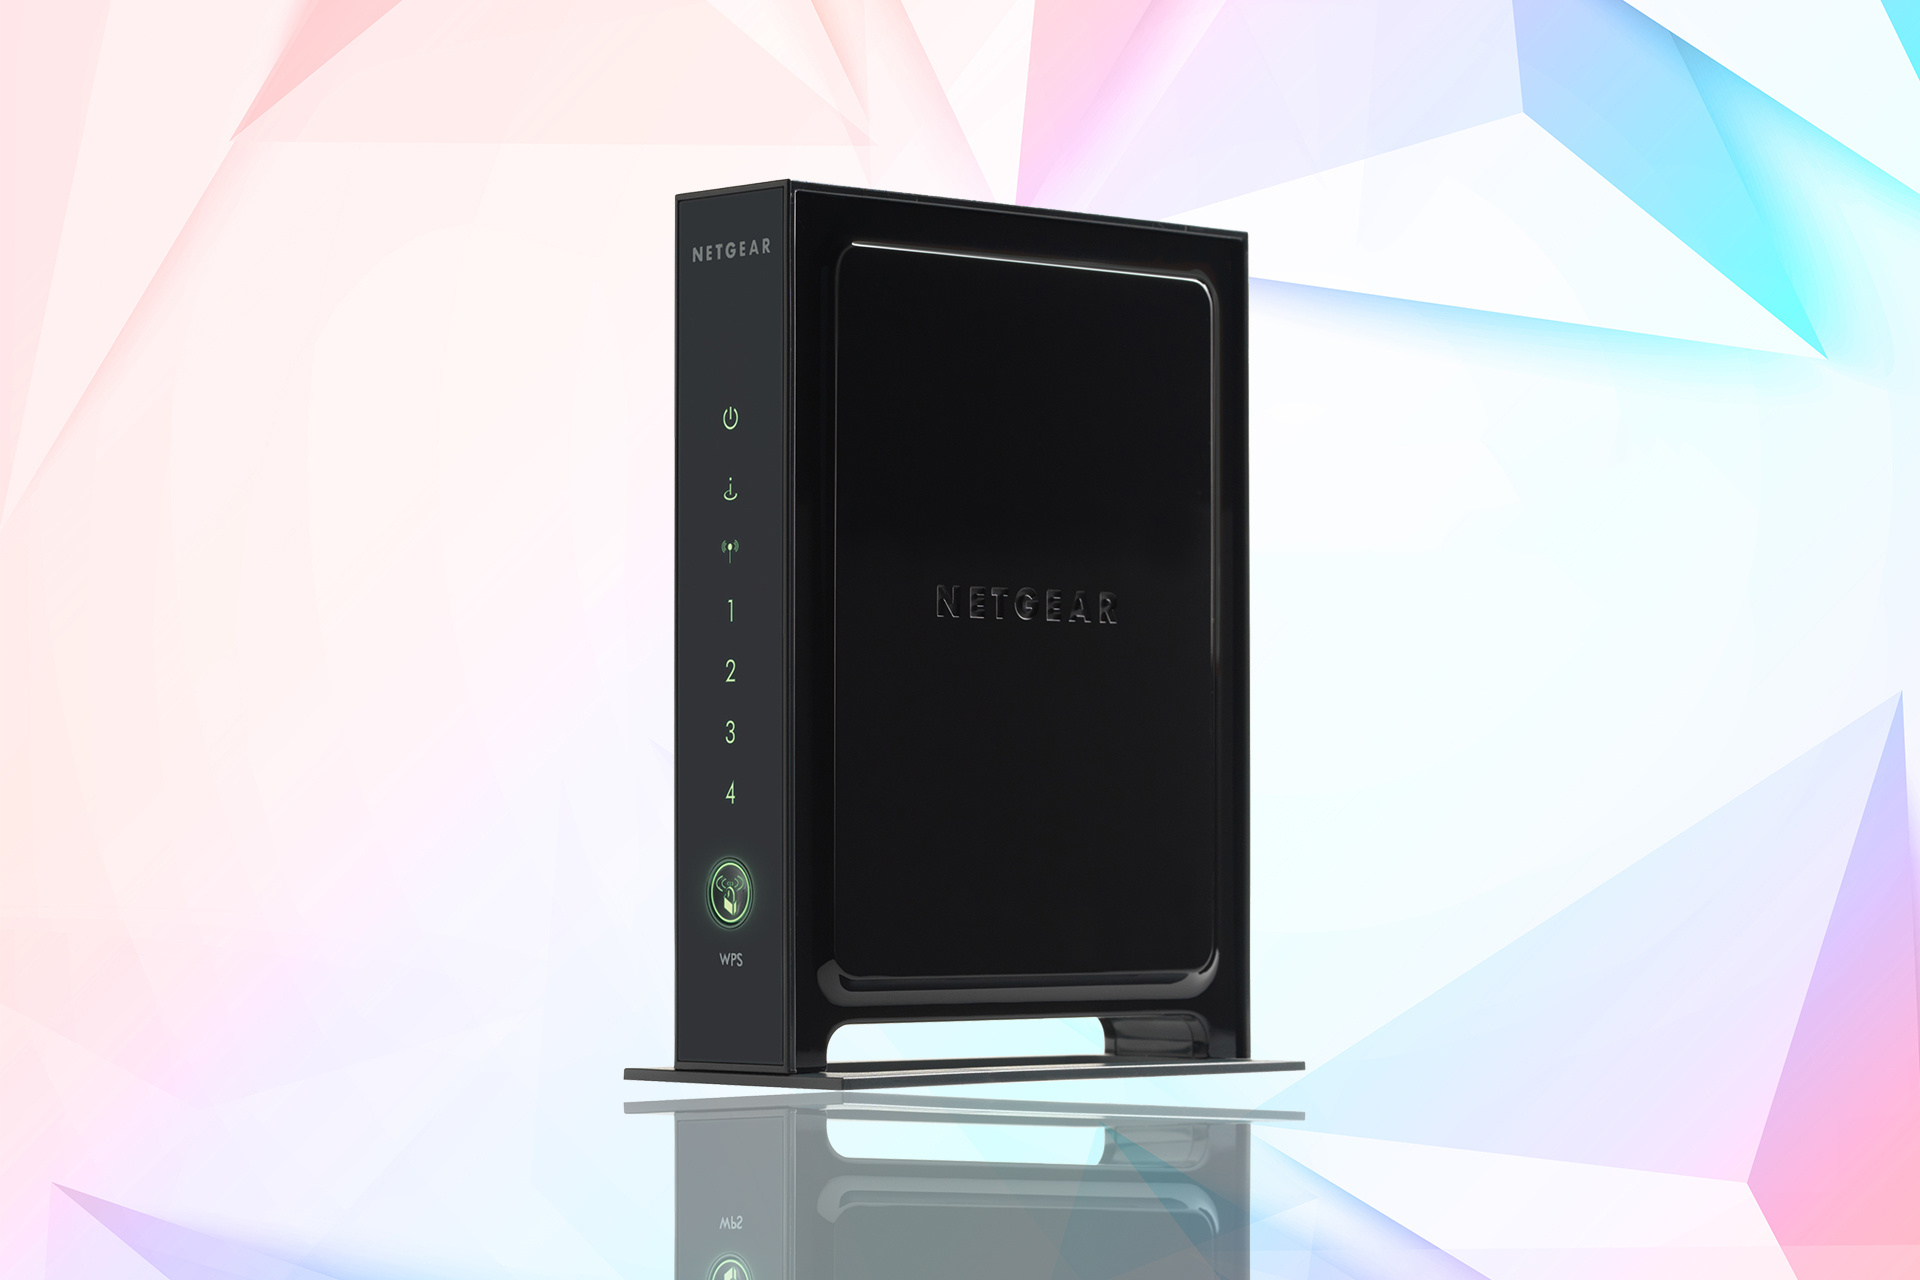 How To Reset Netgear N300 Wireless Router